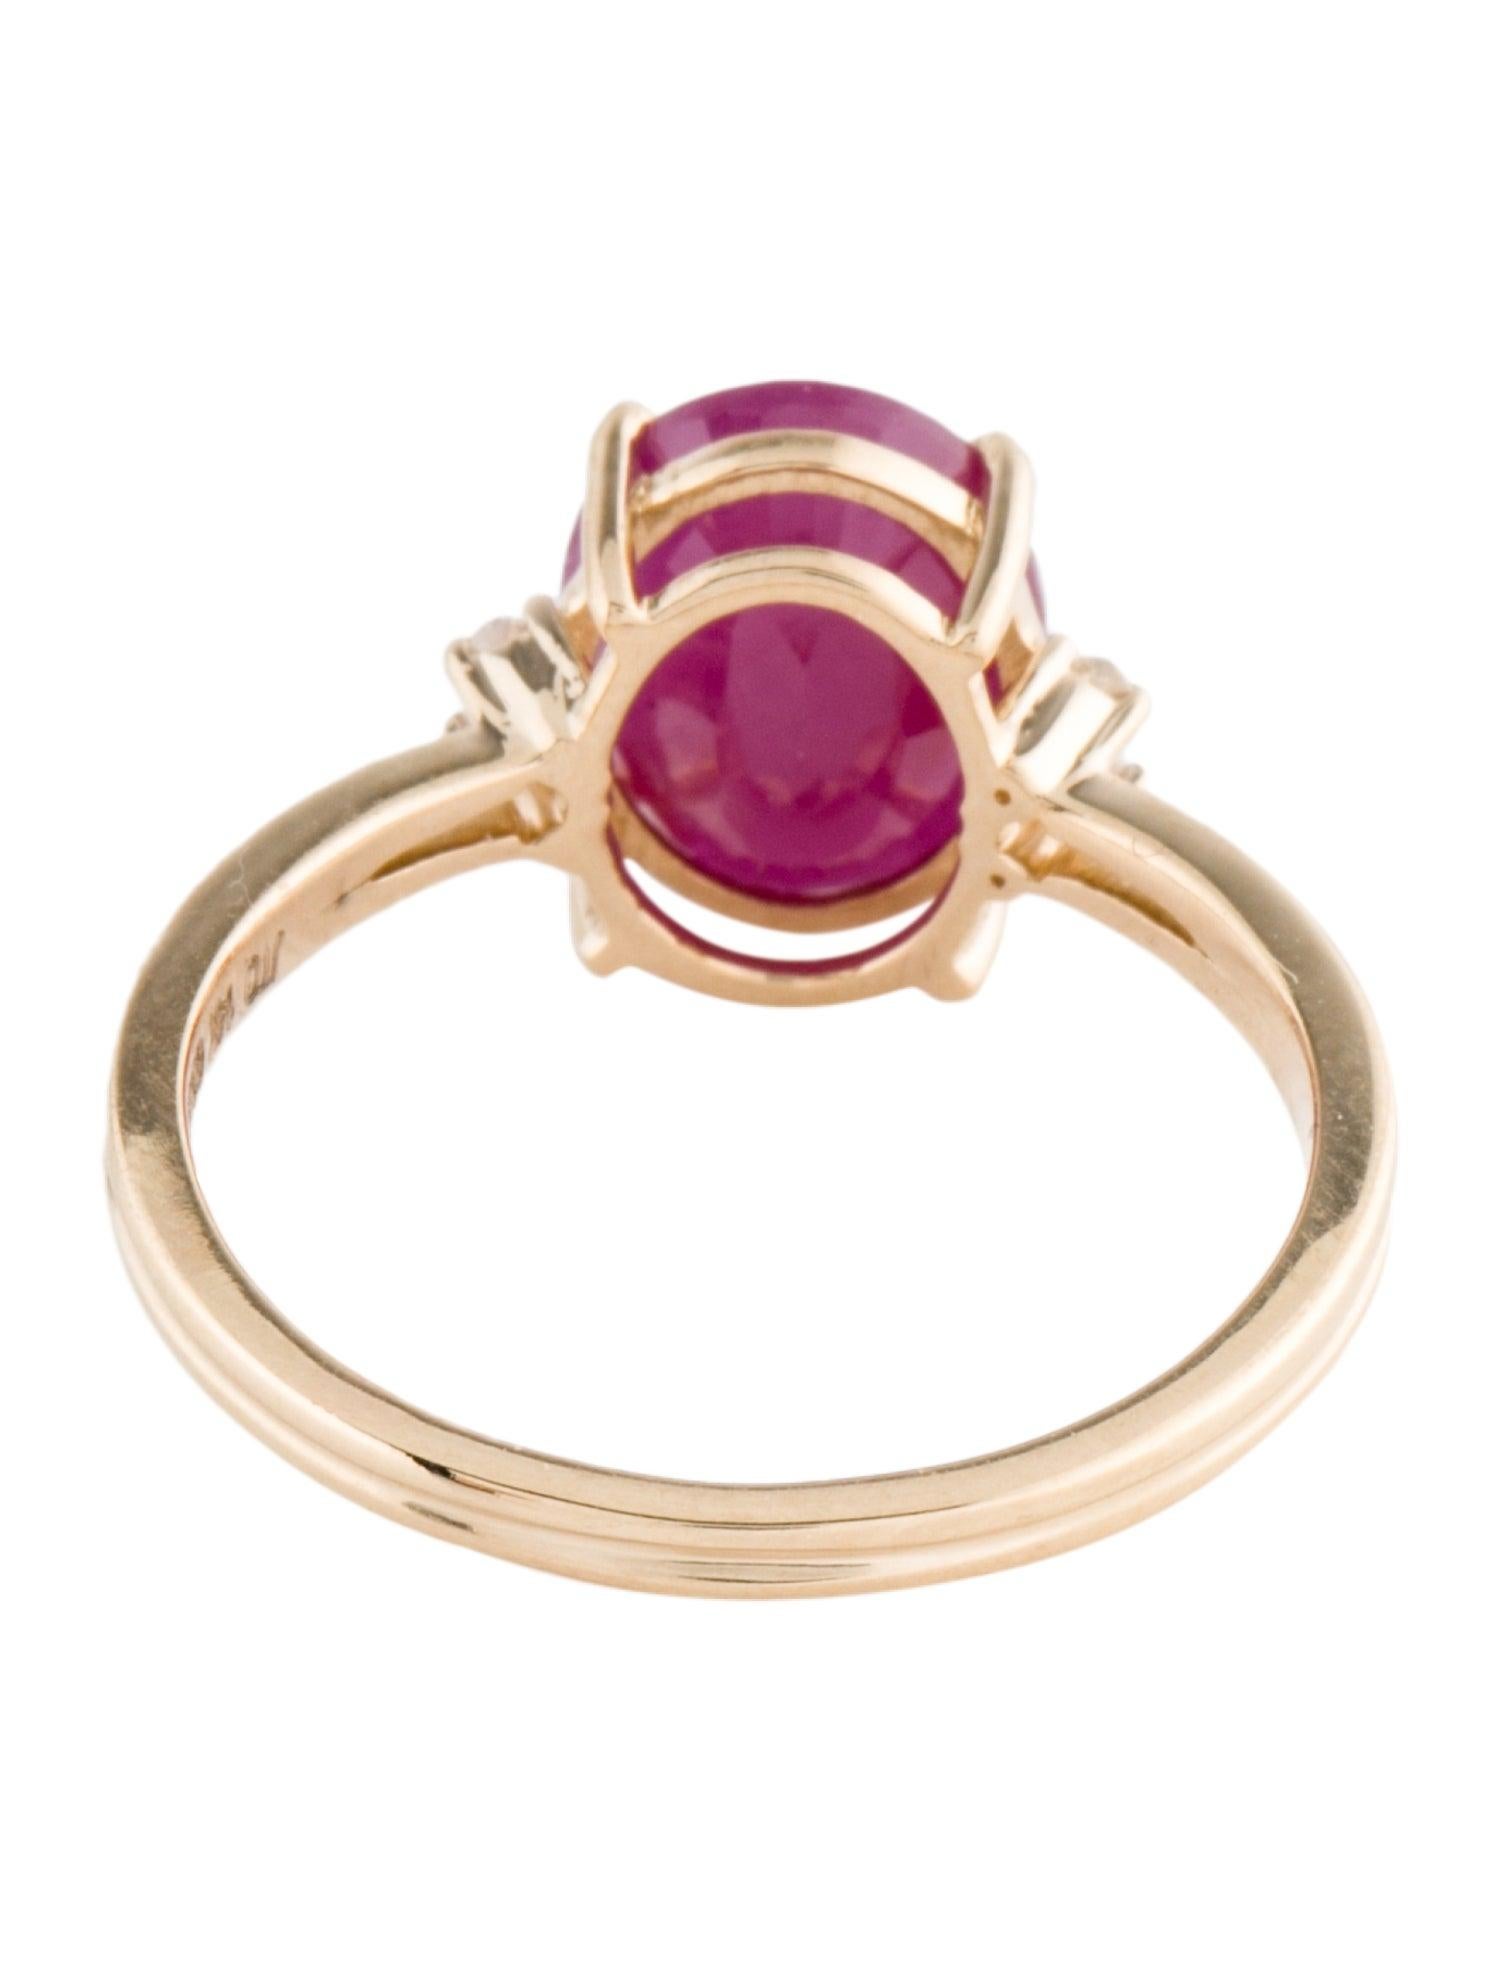 Brilliant Cut Dazzling 14K Gold 2.68ct Ruby & Diamond Cocktail Ring - Size 7 - Fine Gemstone For Sale